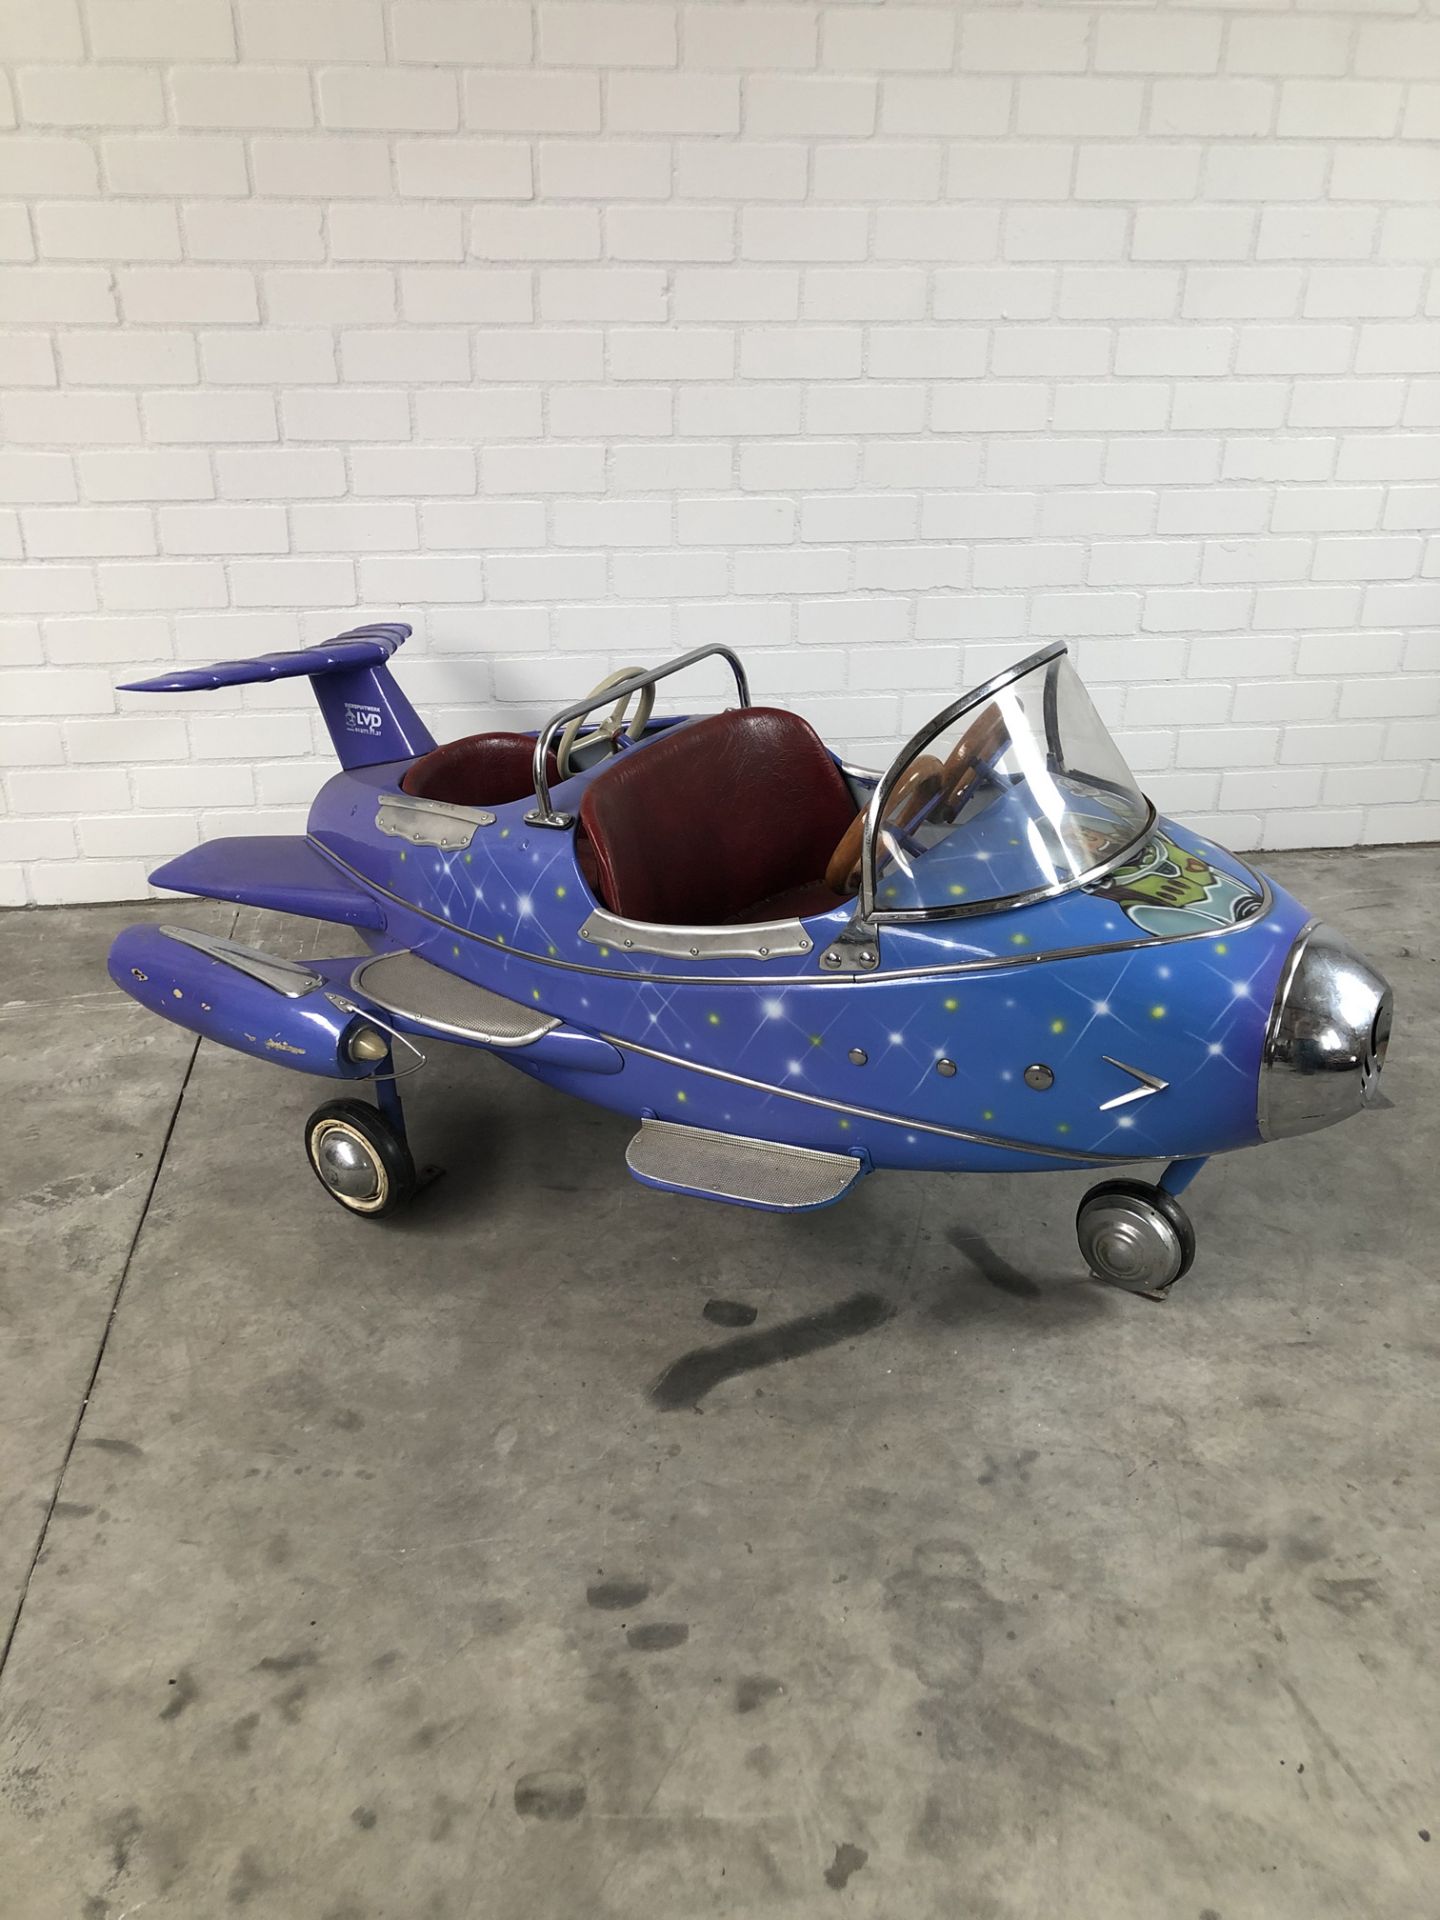 L'Autopede Carousel Jet Fighter - Image 6 of 15